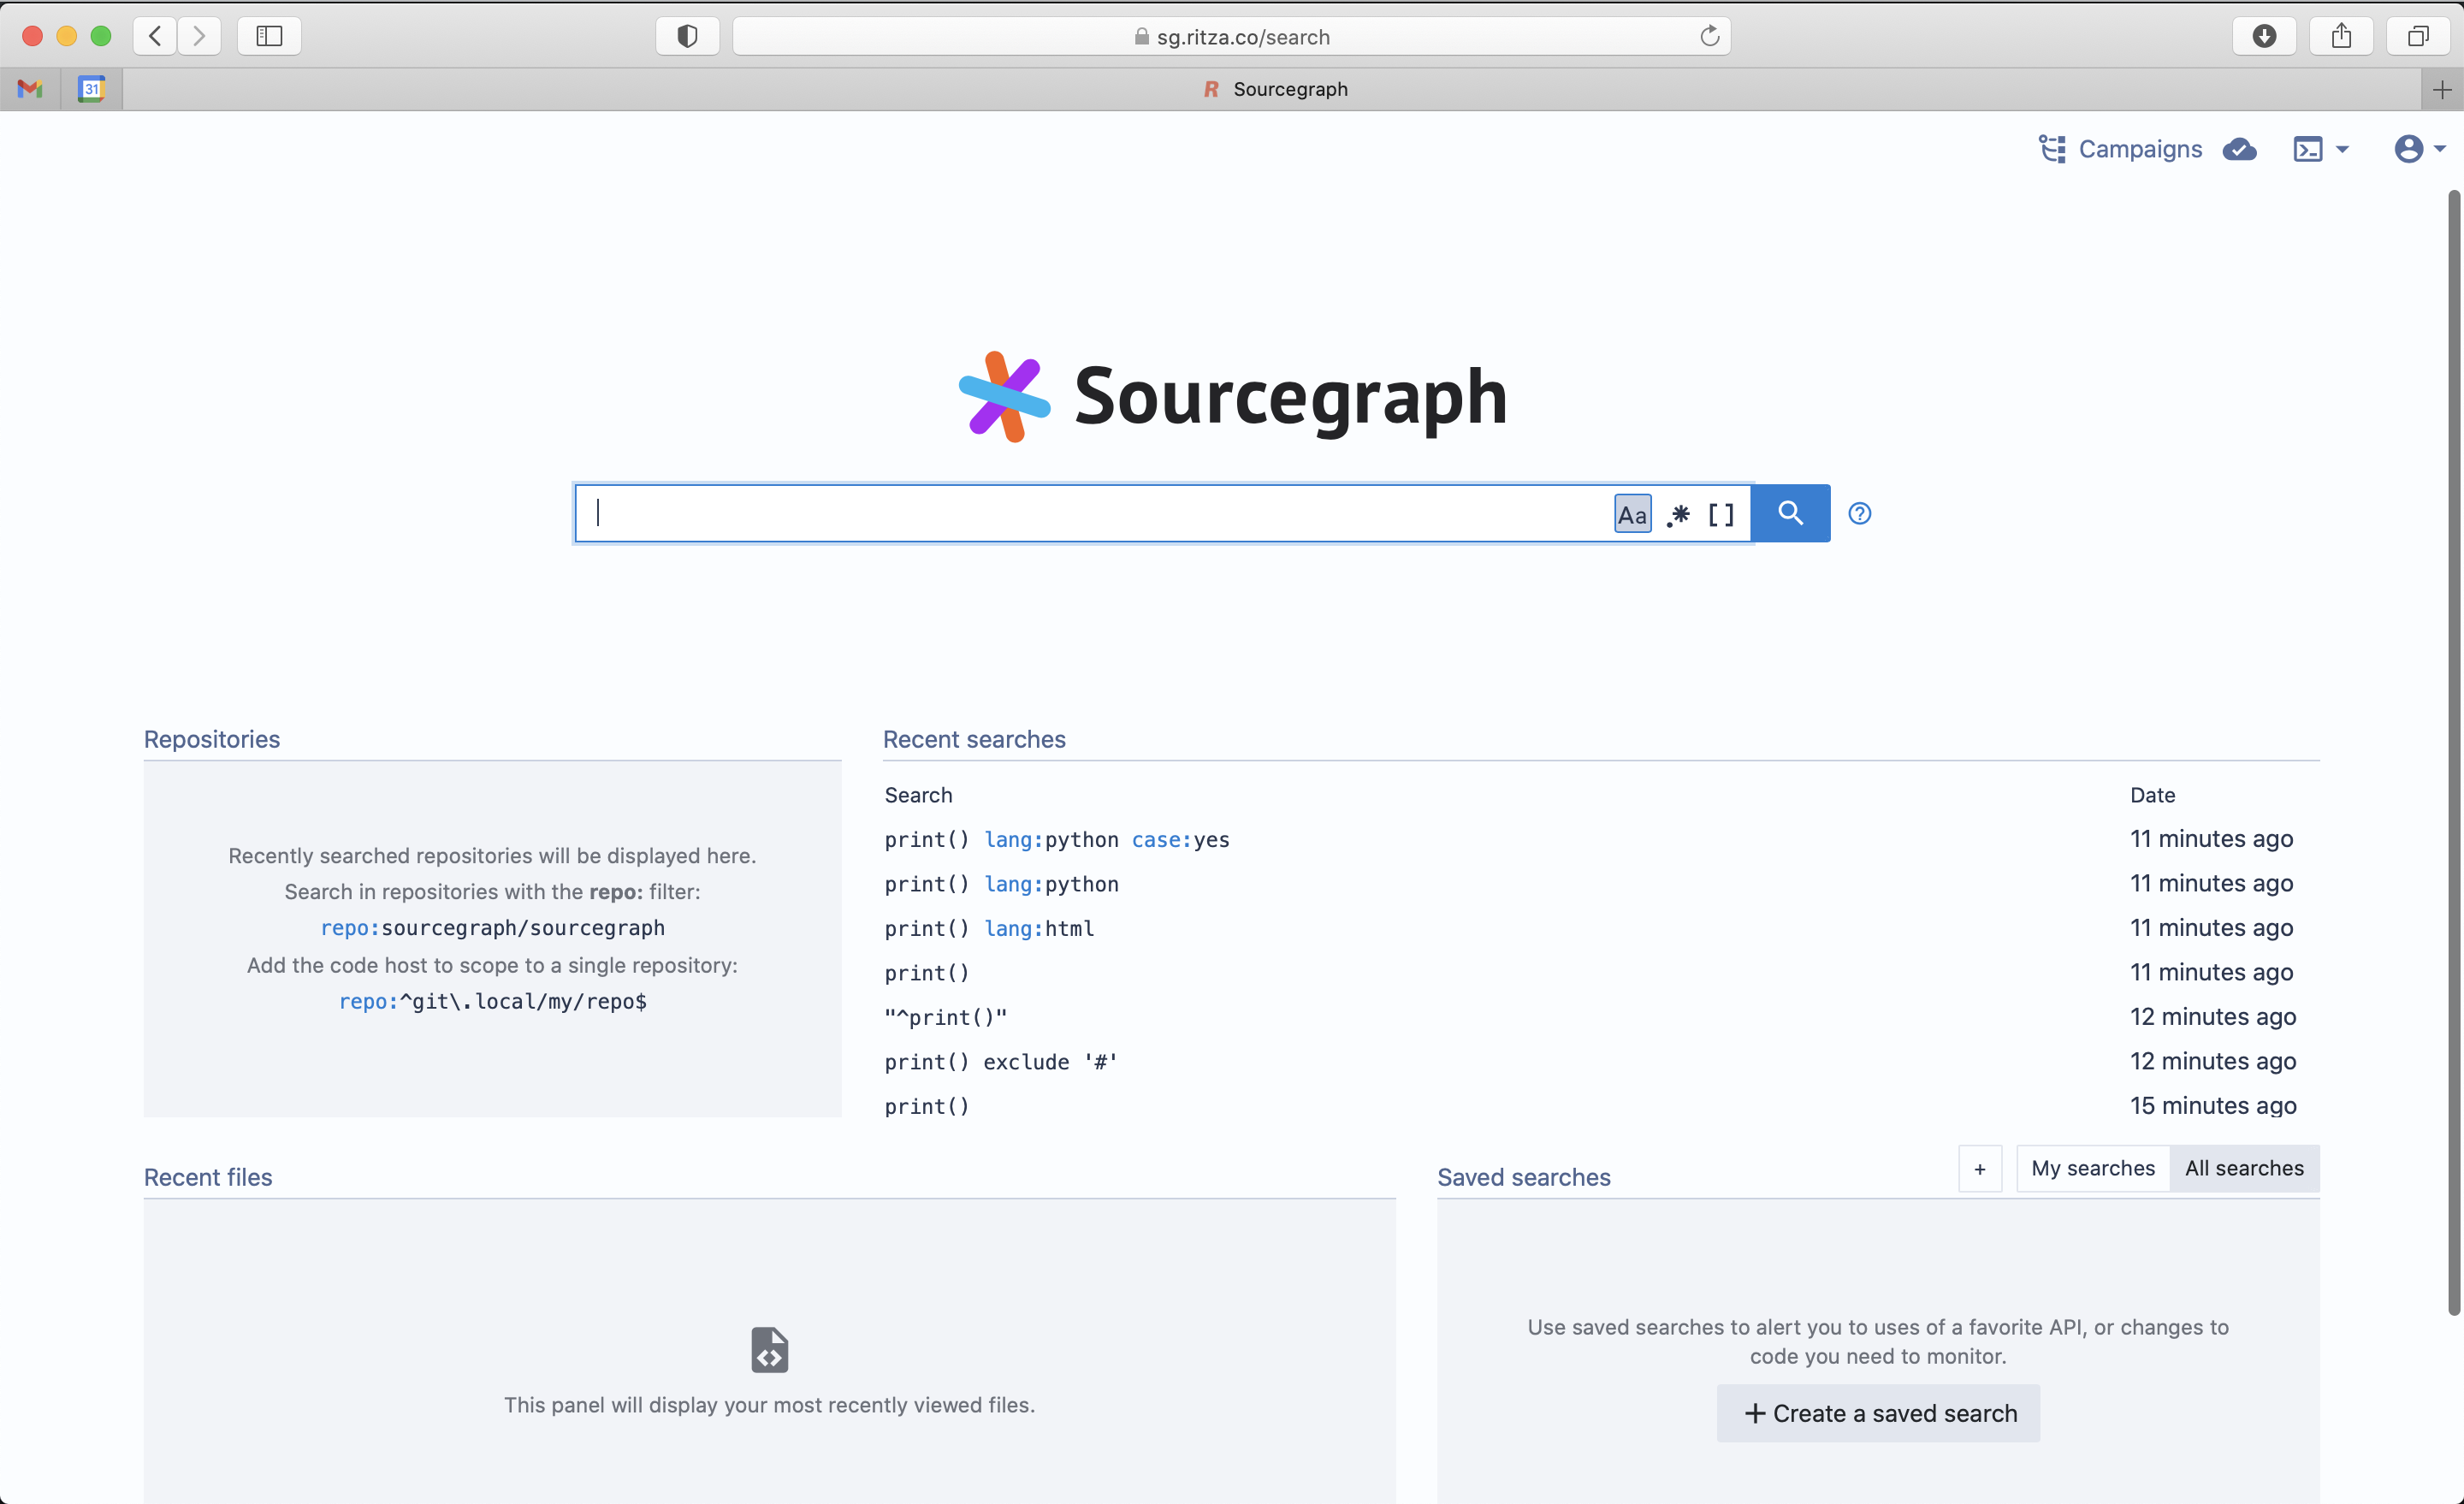 The Sourcegraph dashboard